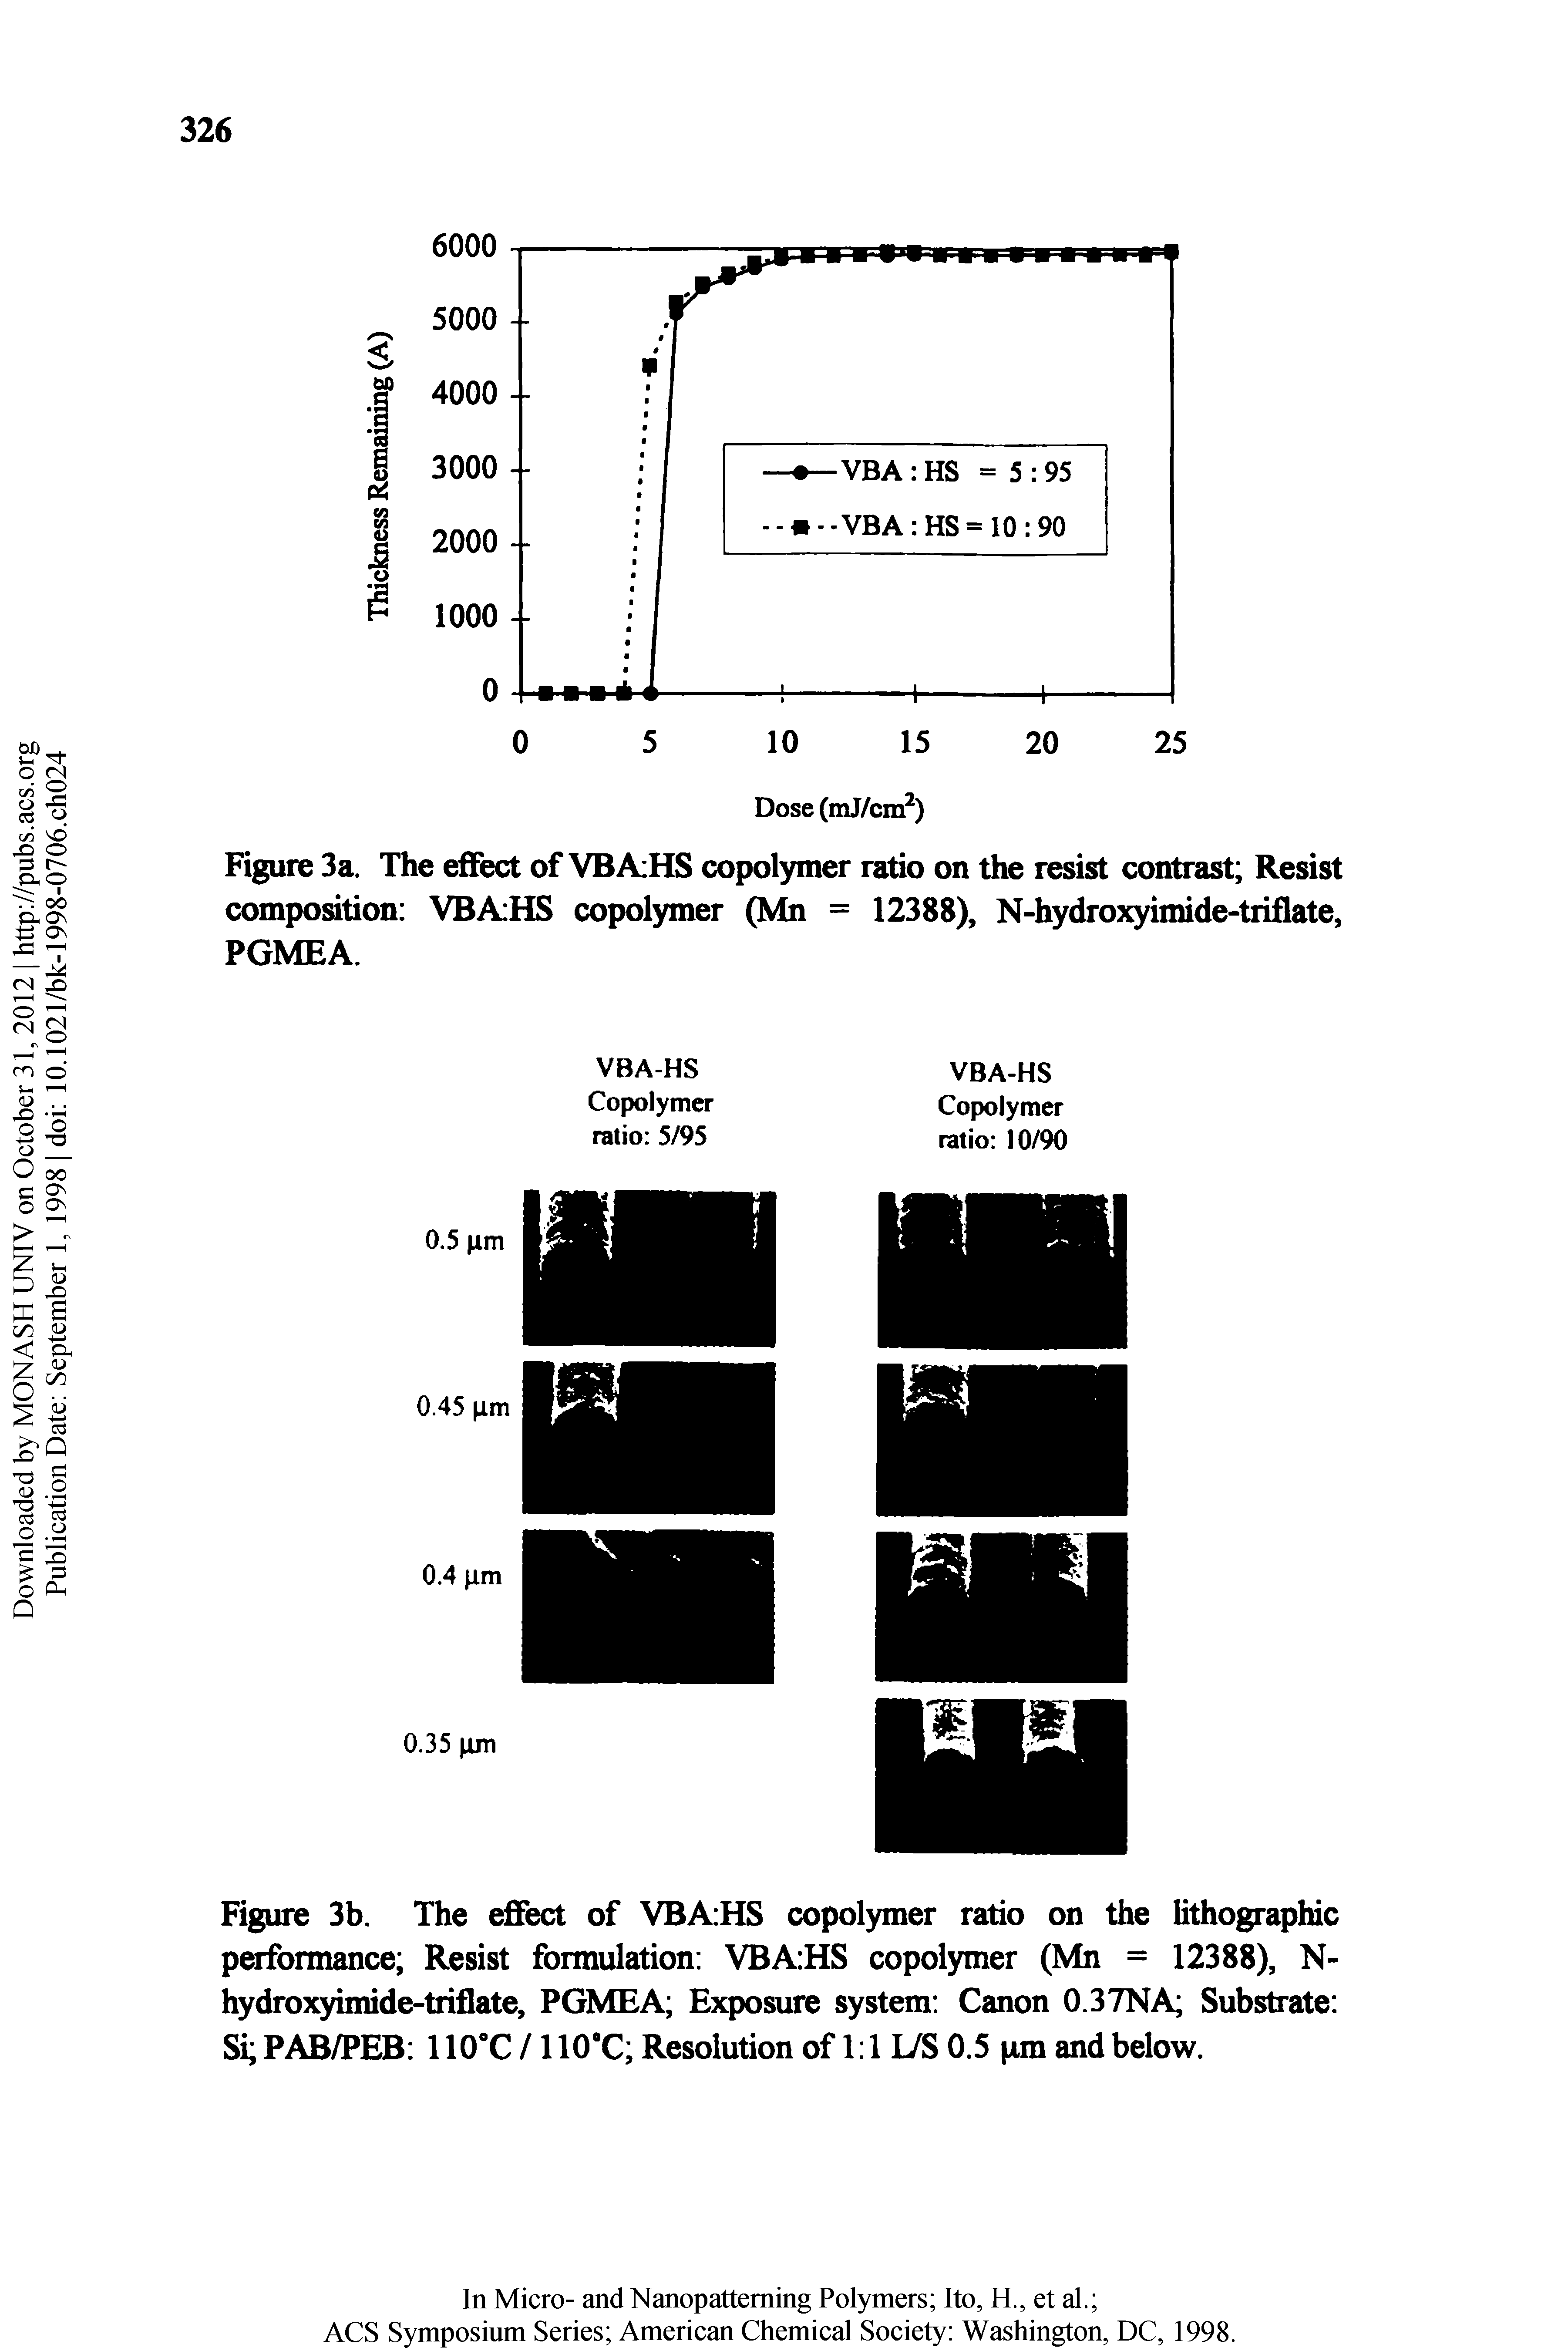 Figure 3a. The effect of VBAiHS copolymer ratio on the resist contrast Resist composition VBAiHS copolymer (Mn = 12388), N-hydroxyimide-triflate, PGMEA.